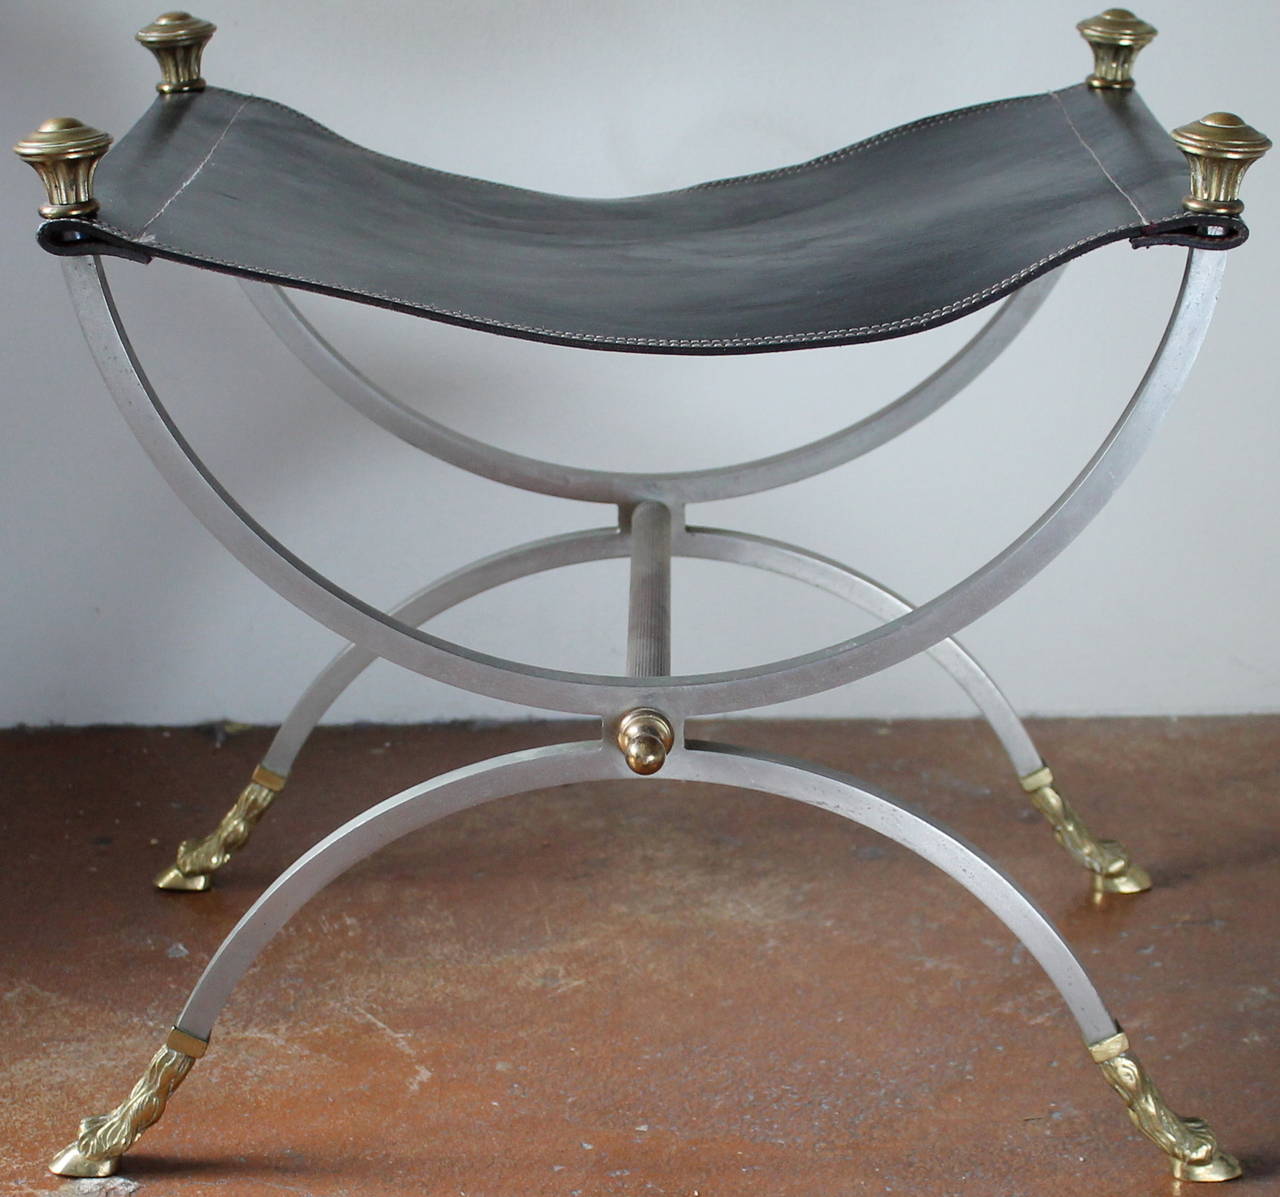 A chic pair of two stools in brass and steel with black leather seats in the style of Maison Jasen.
brass hoofed feet.
Made in Italy in 1970s.